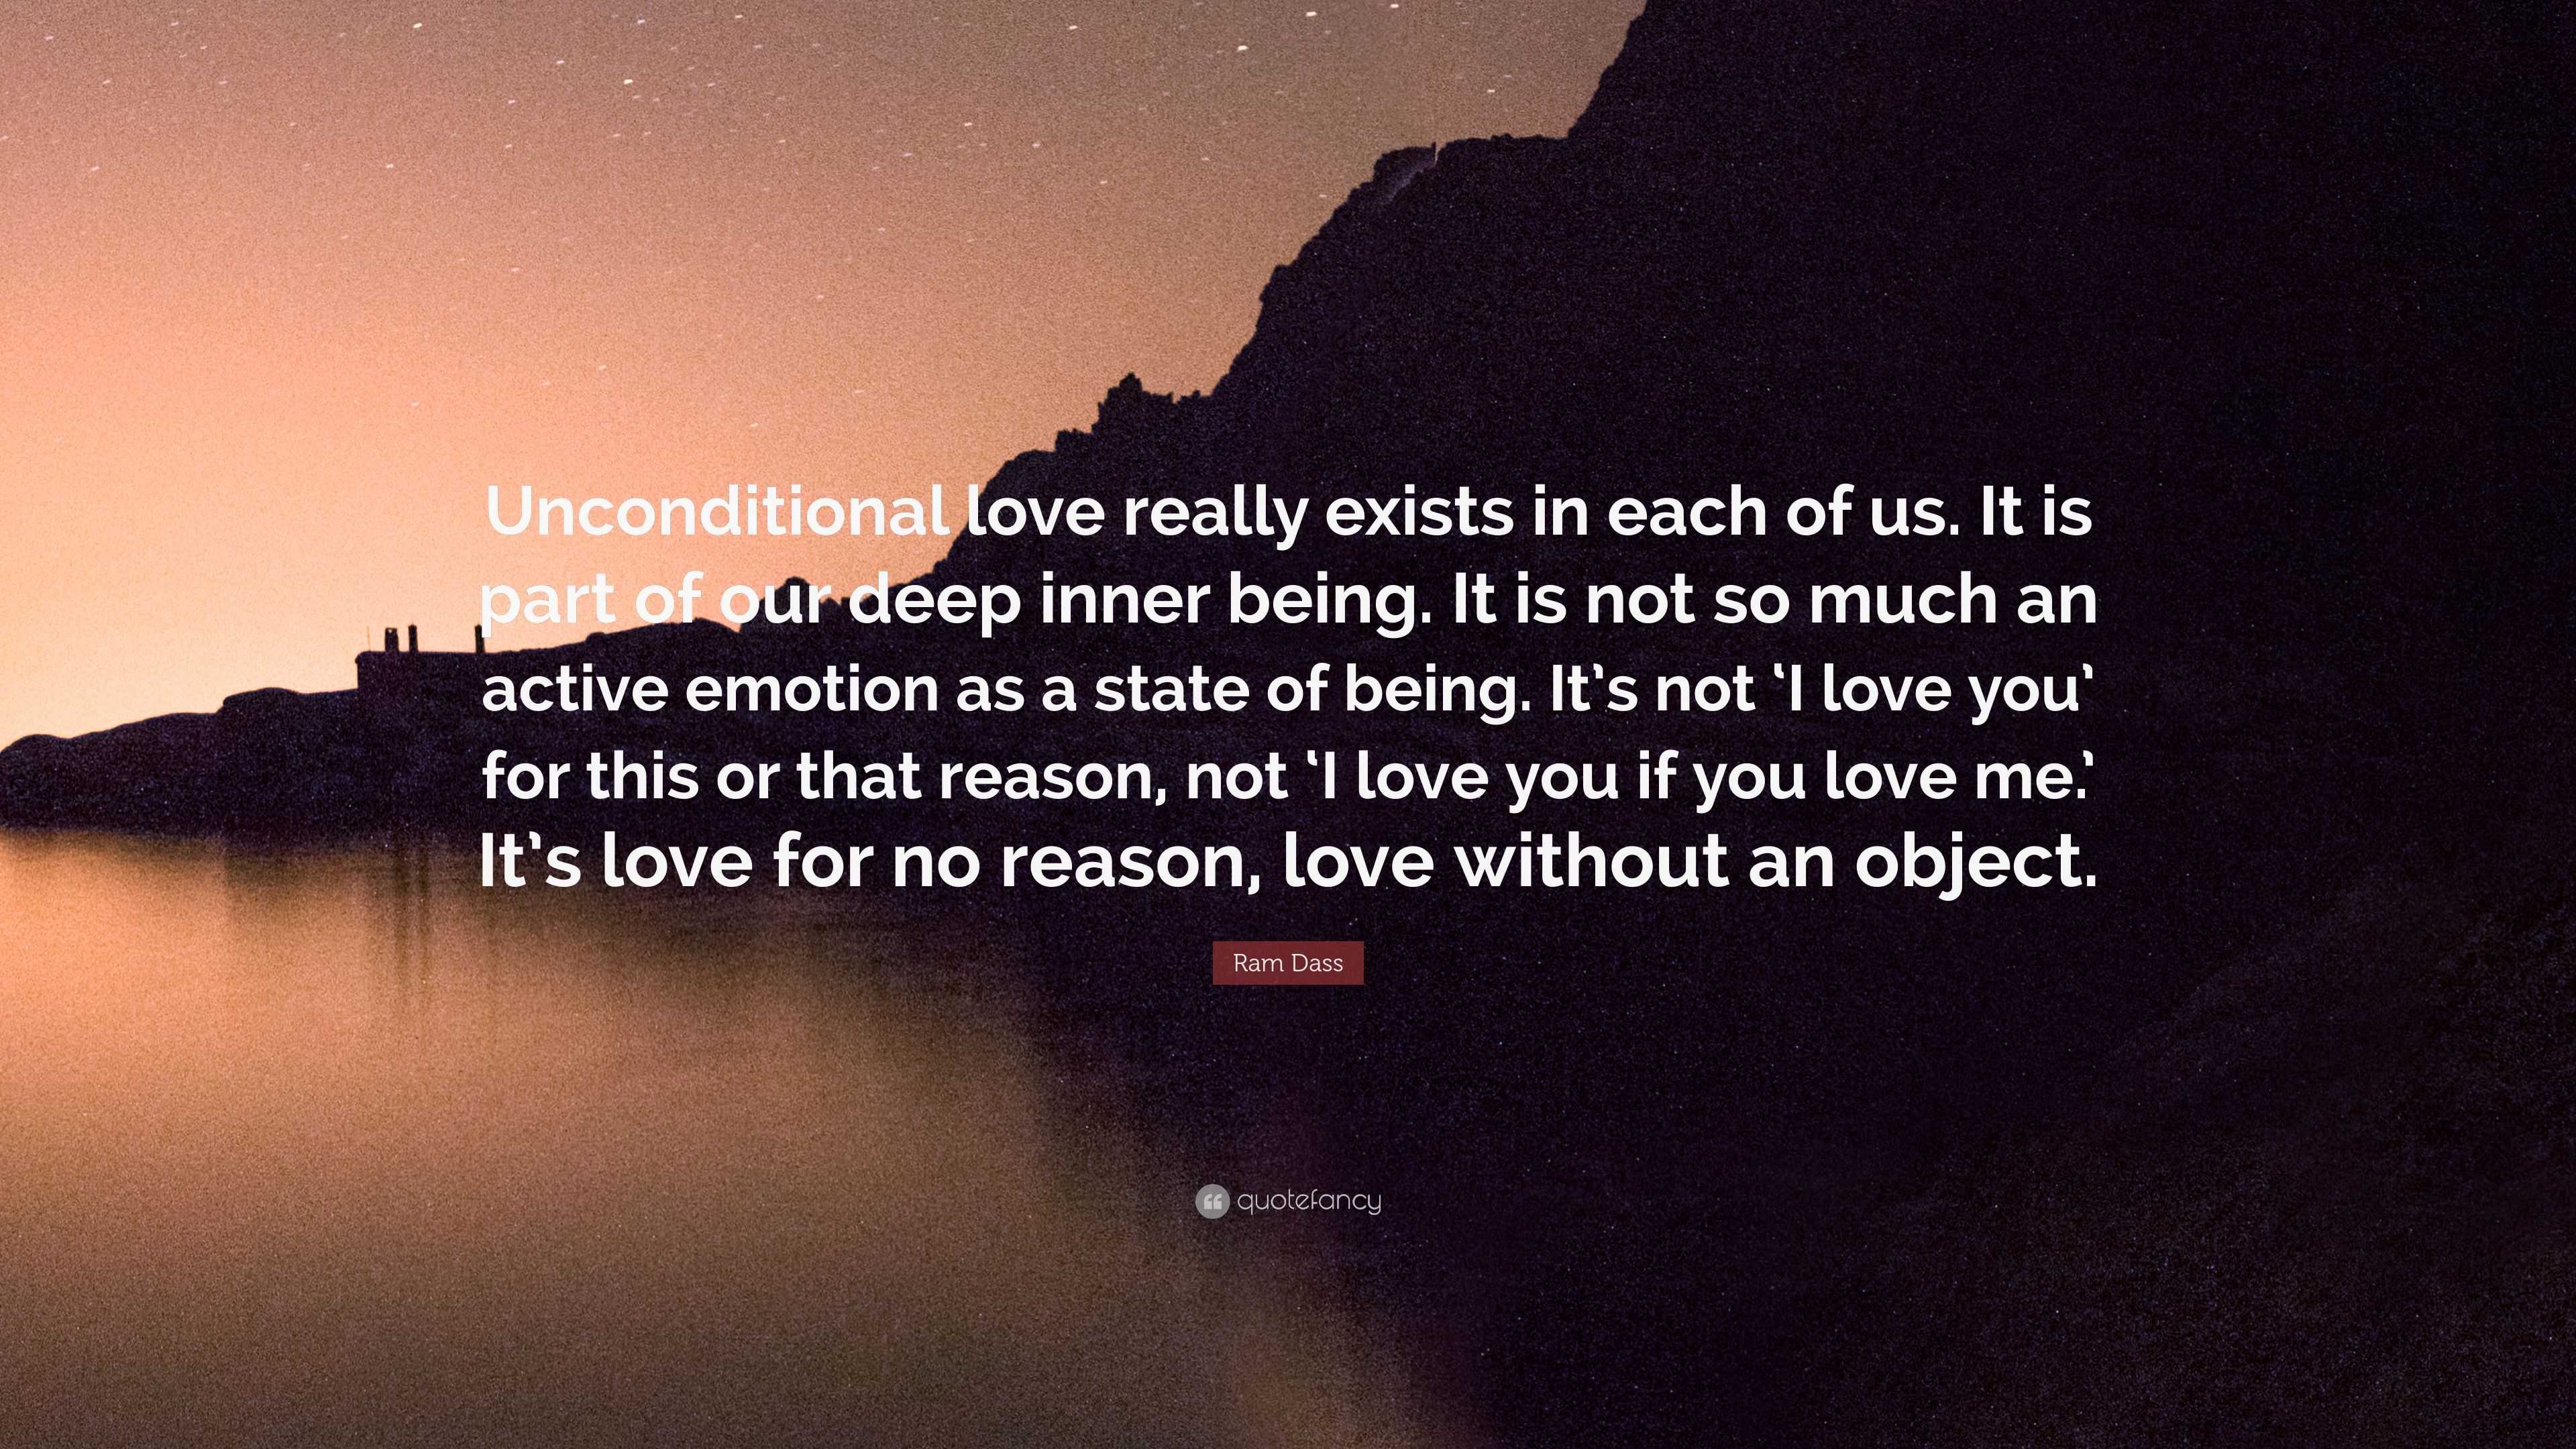 does unconditional love exist